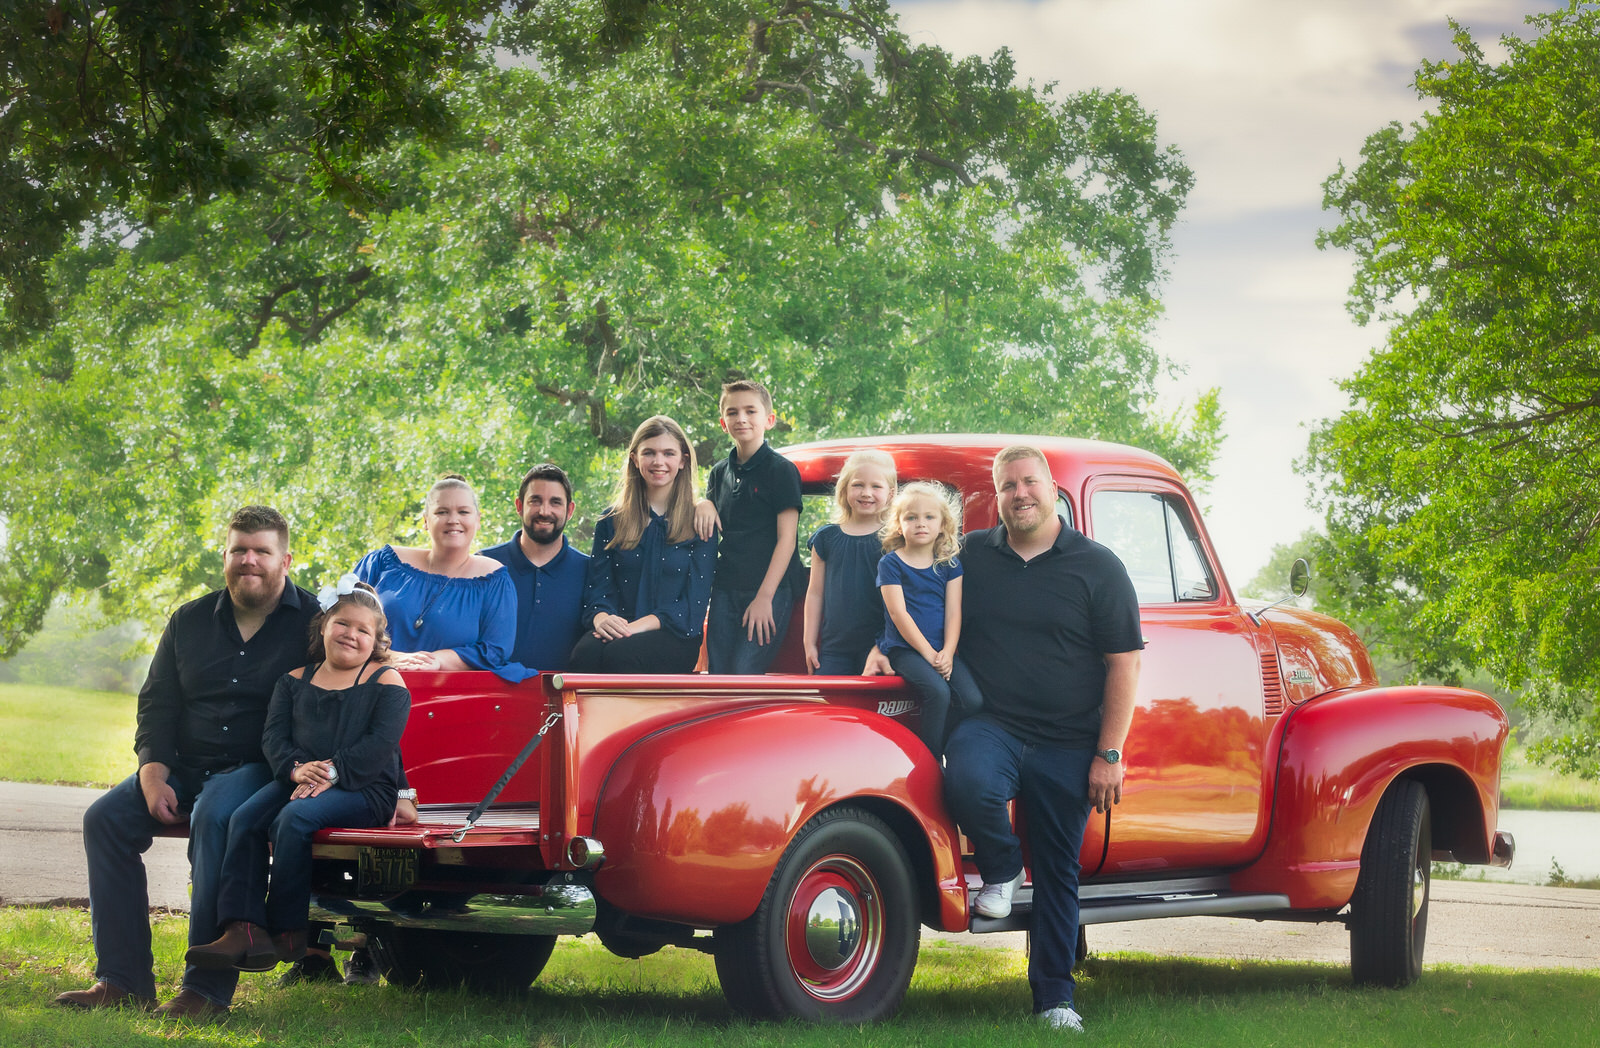 Family portrait in bed of Vintage Red Truck